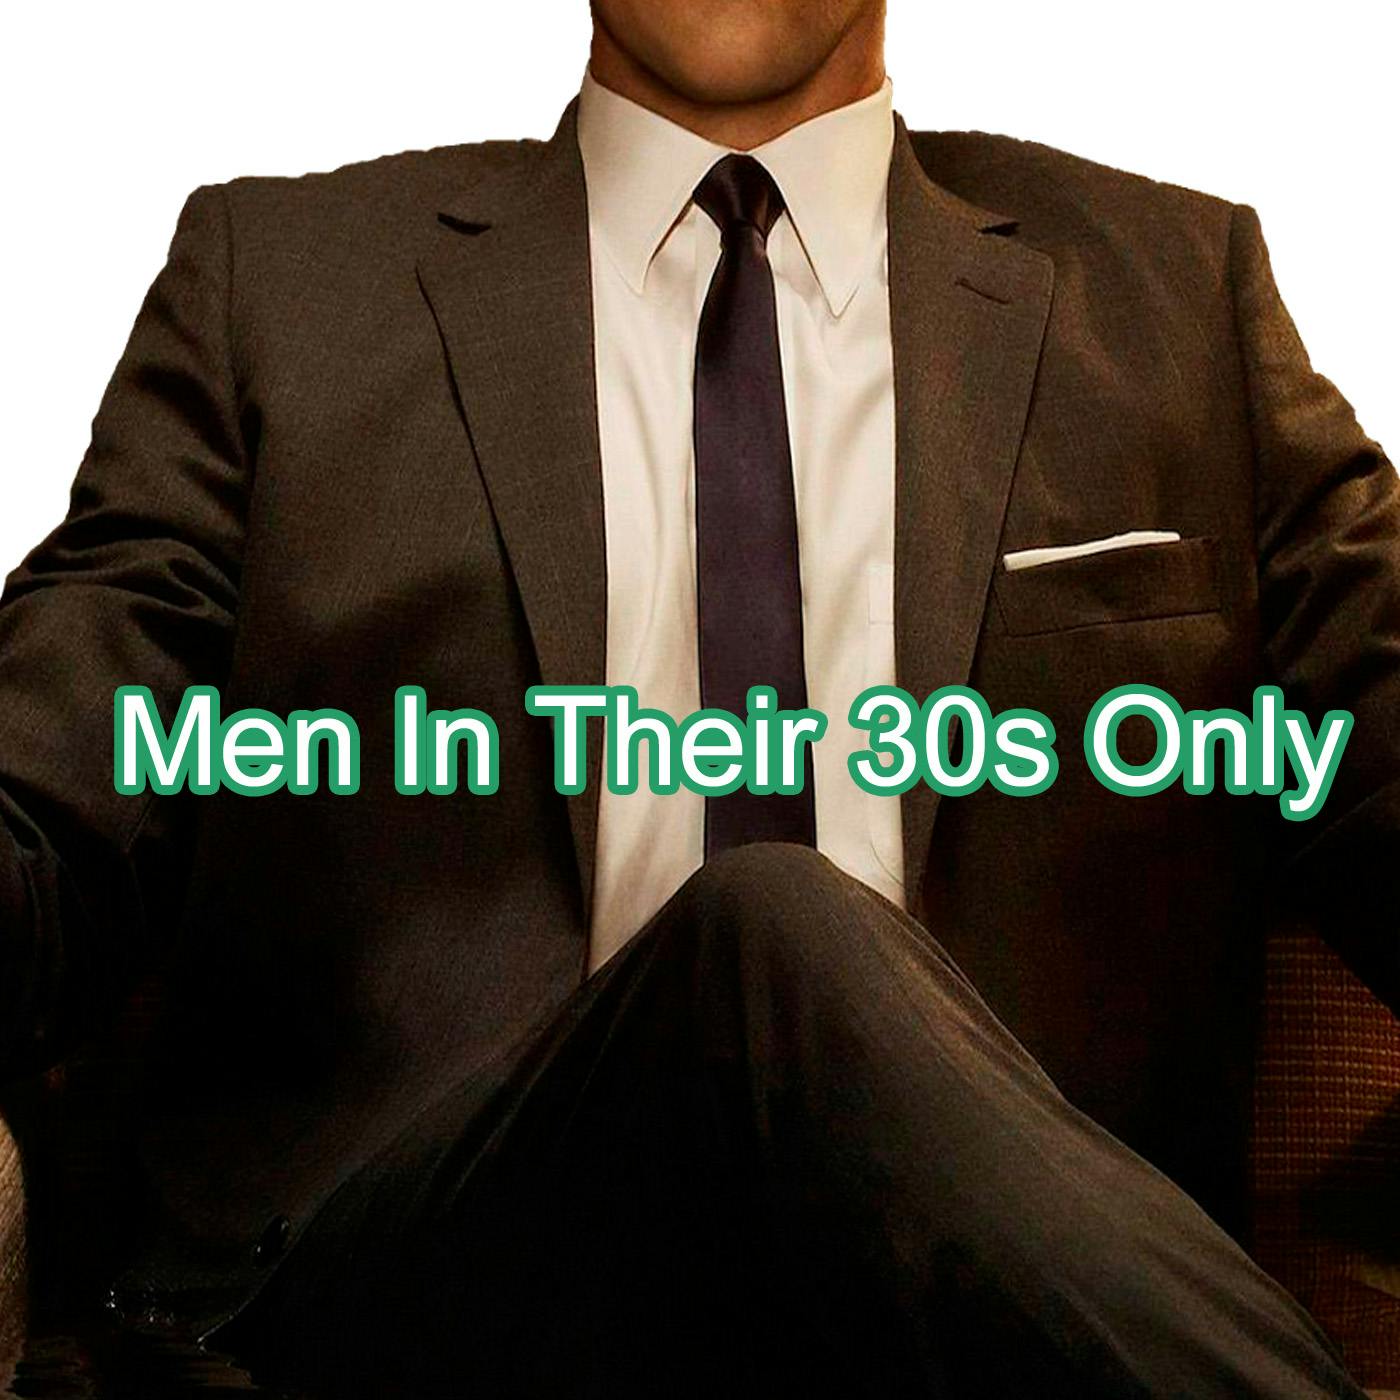 Men In Their 30s Only - Episode 2